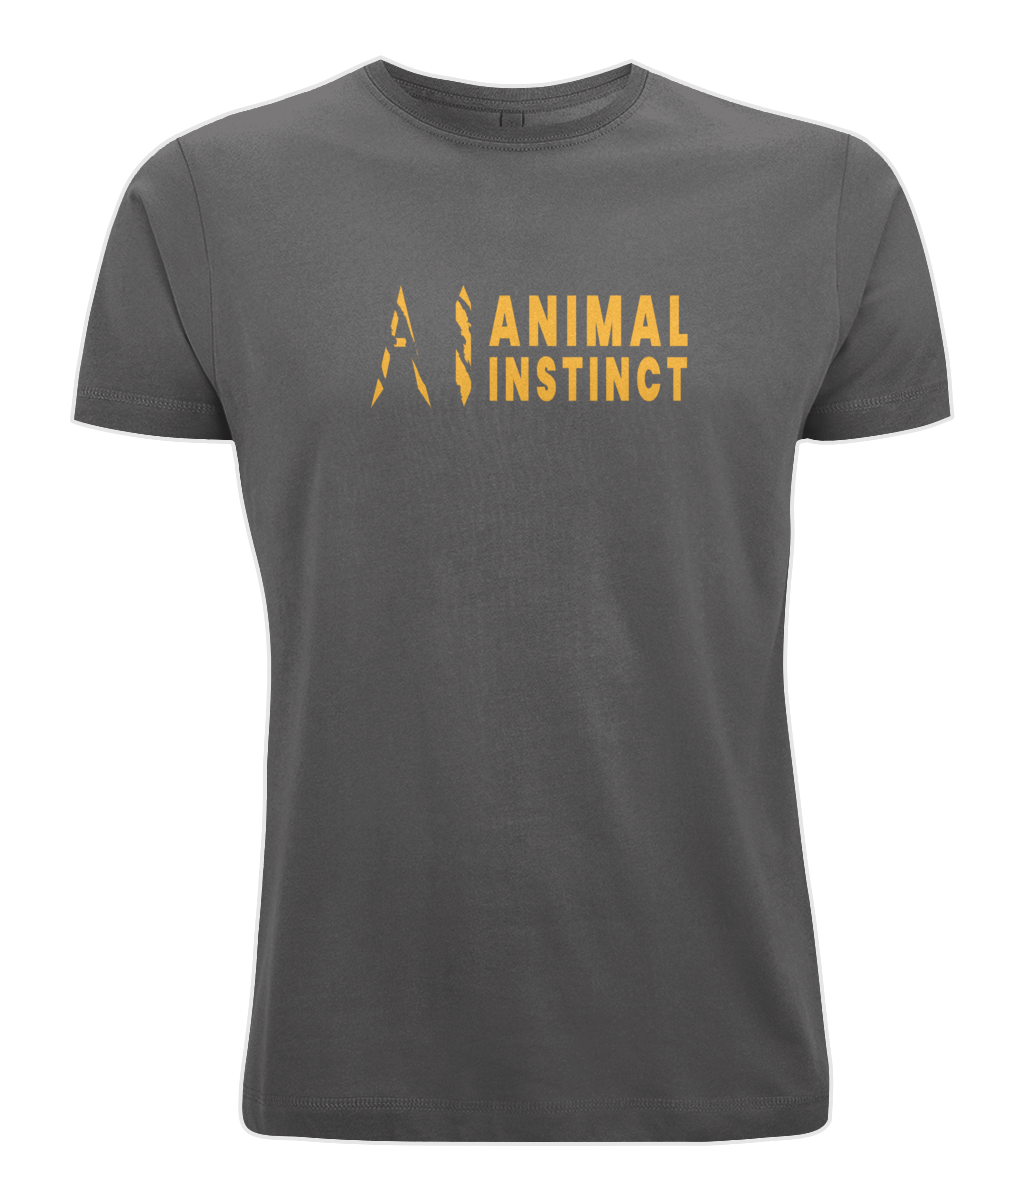 Mens light charcoal Graphic Animal Instinct T-Shirt with Premium gold AI logo and Animal Instinct written in premium gold Across the middle of the chest